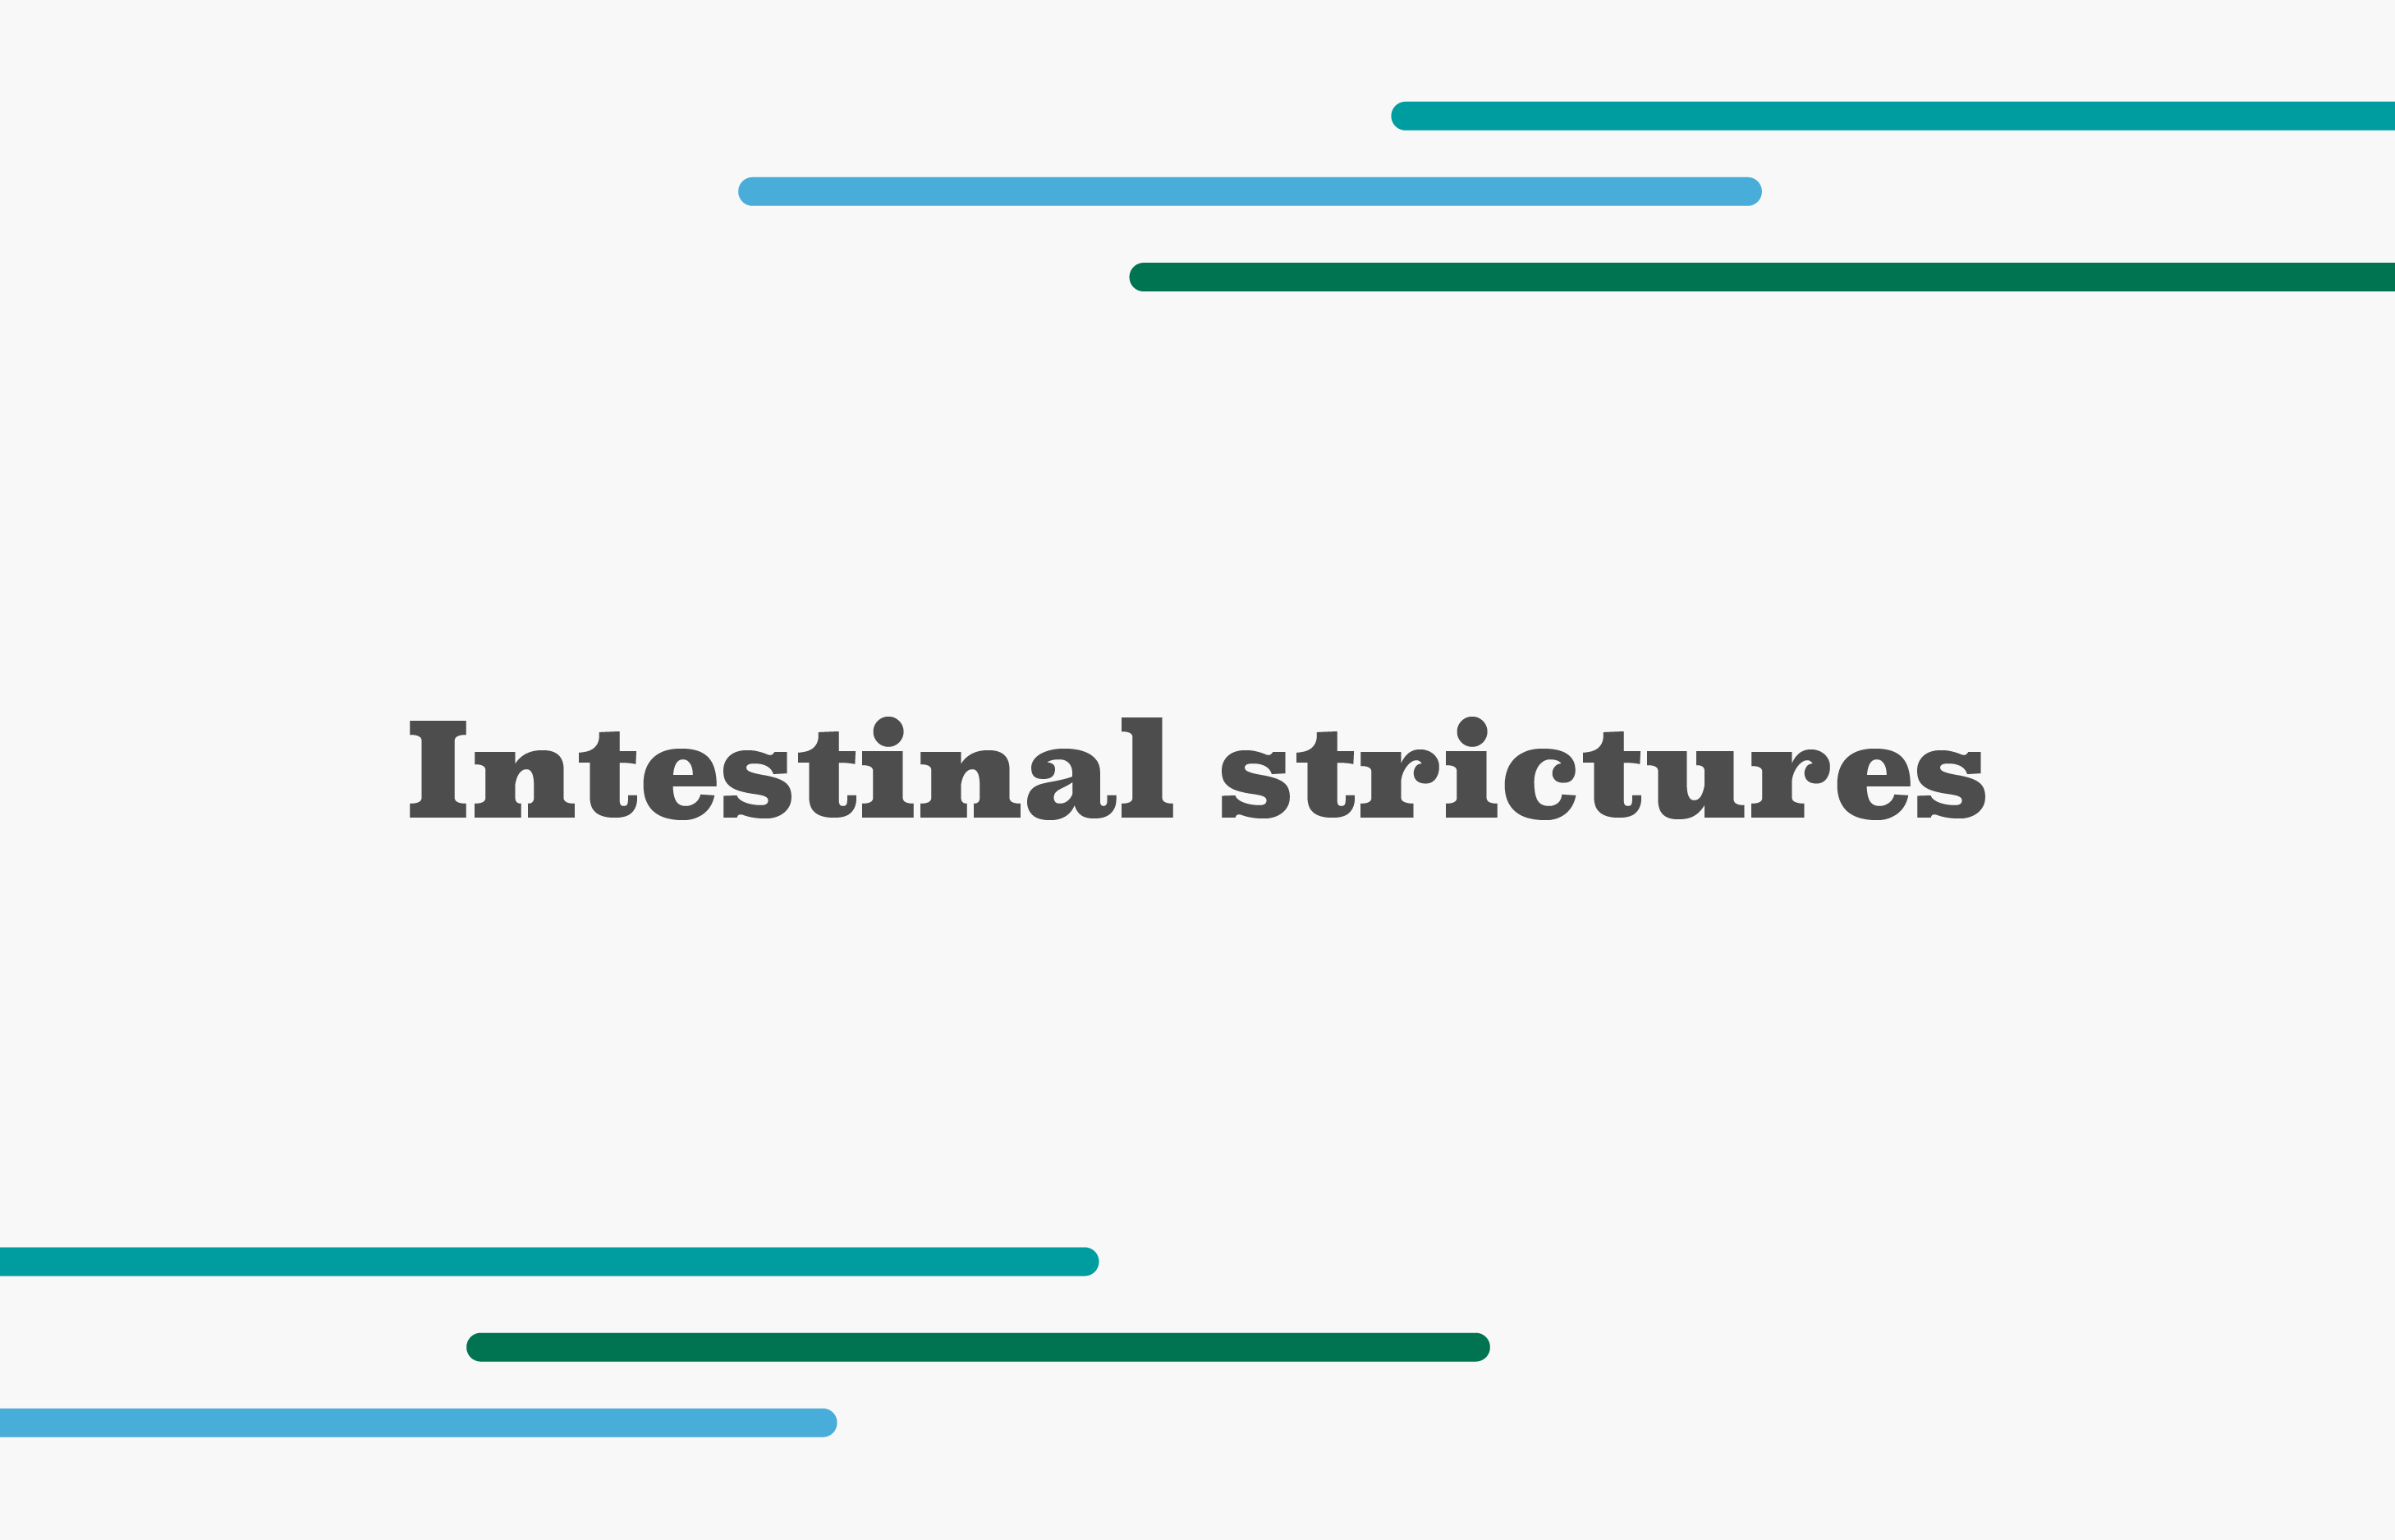 Intestinal strictures